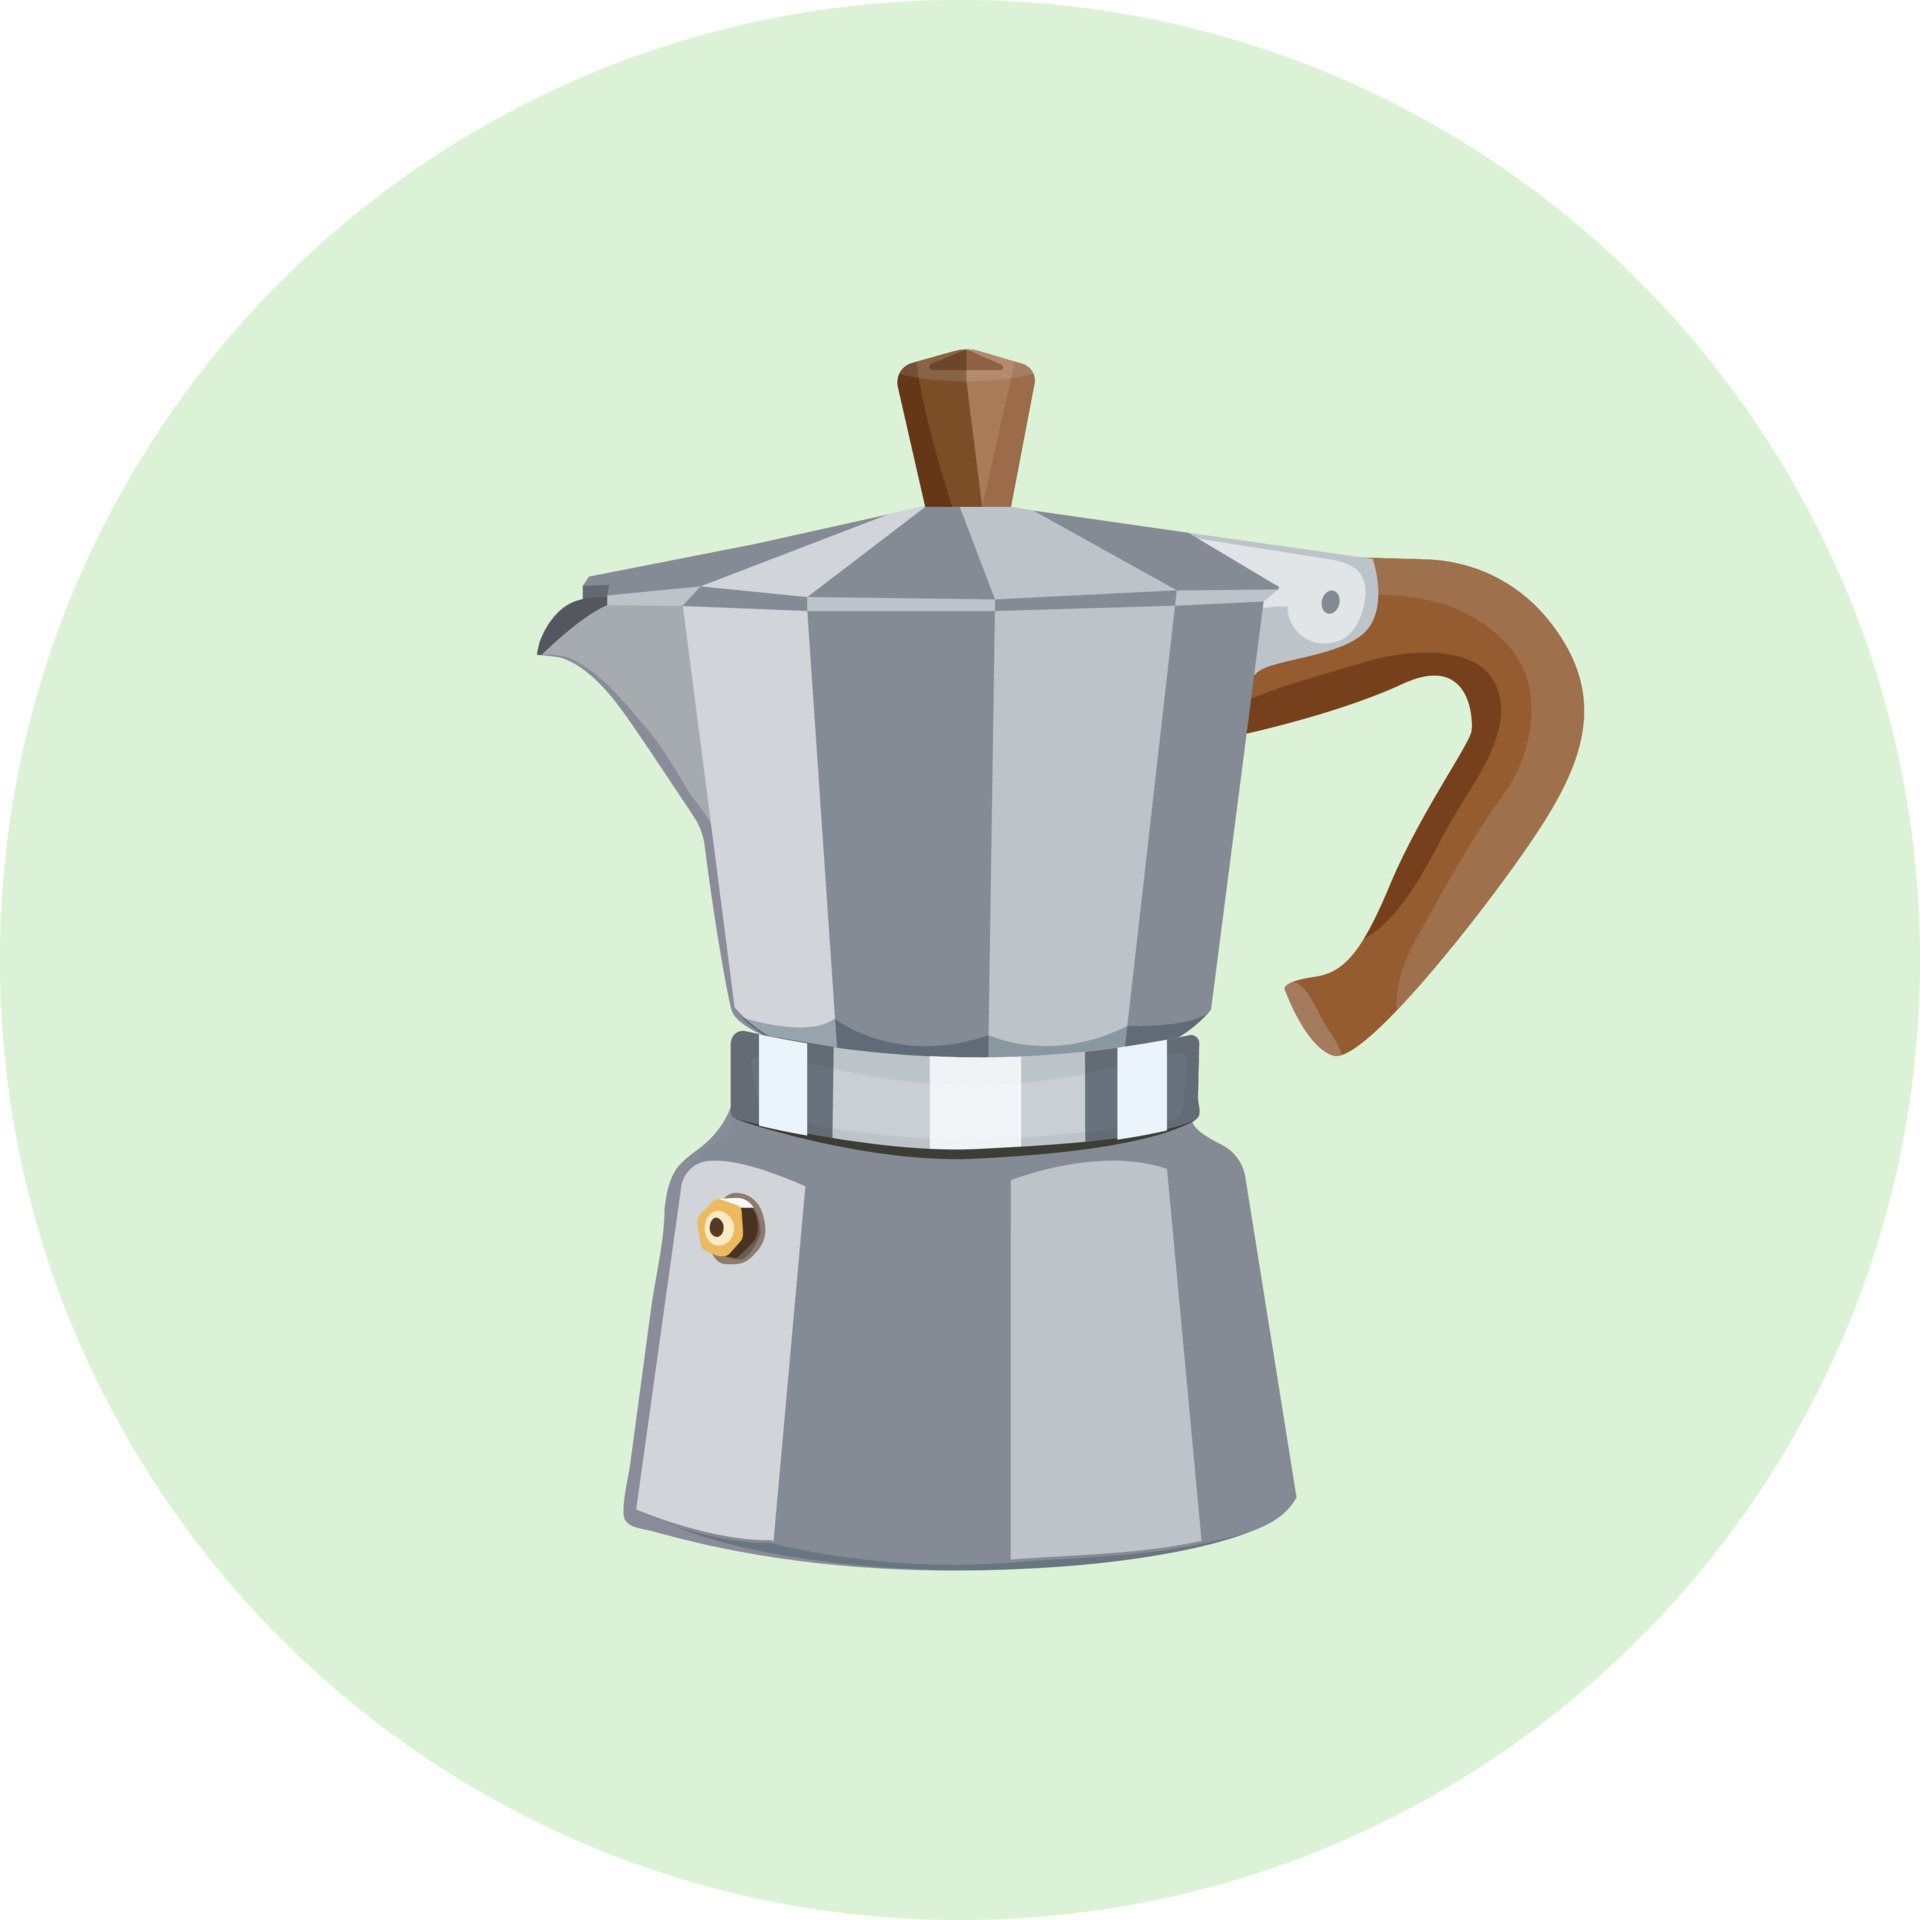 https://static.vecteezy.com/system/resources/previews/005/532/941/original/realistic-illustration-of-traditional-italian-coffee-maker-stove-top-espresso-maker-vector.jpg